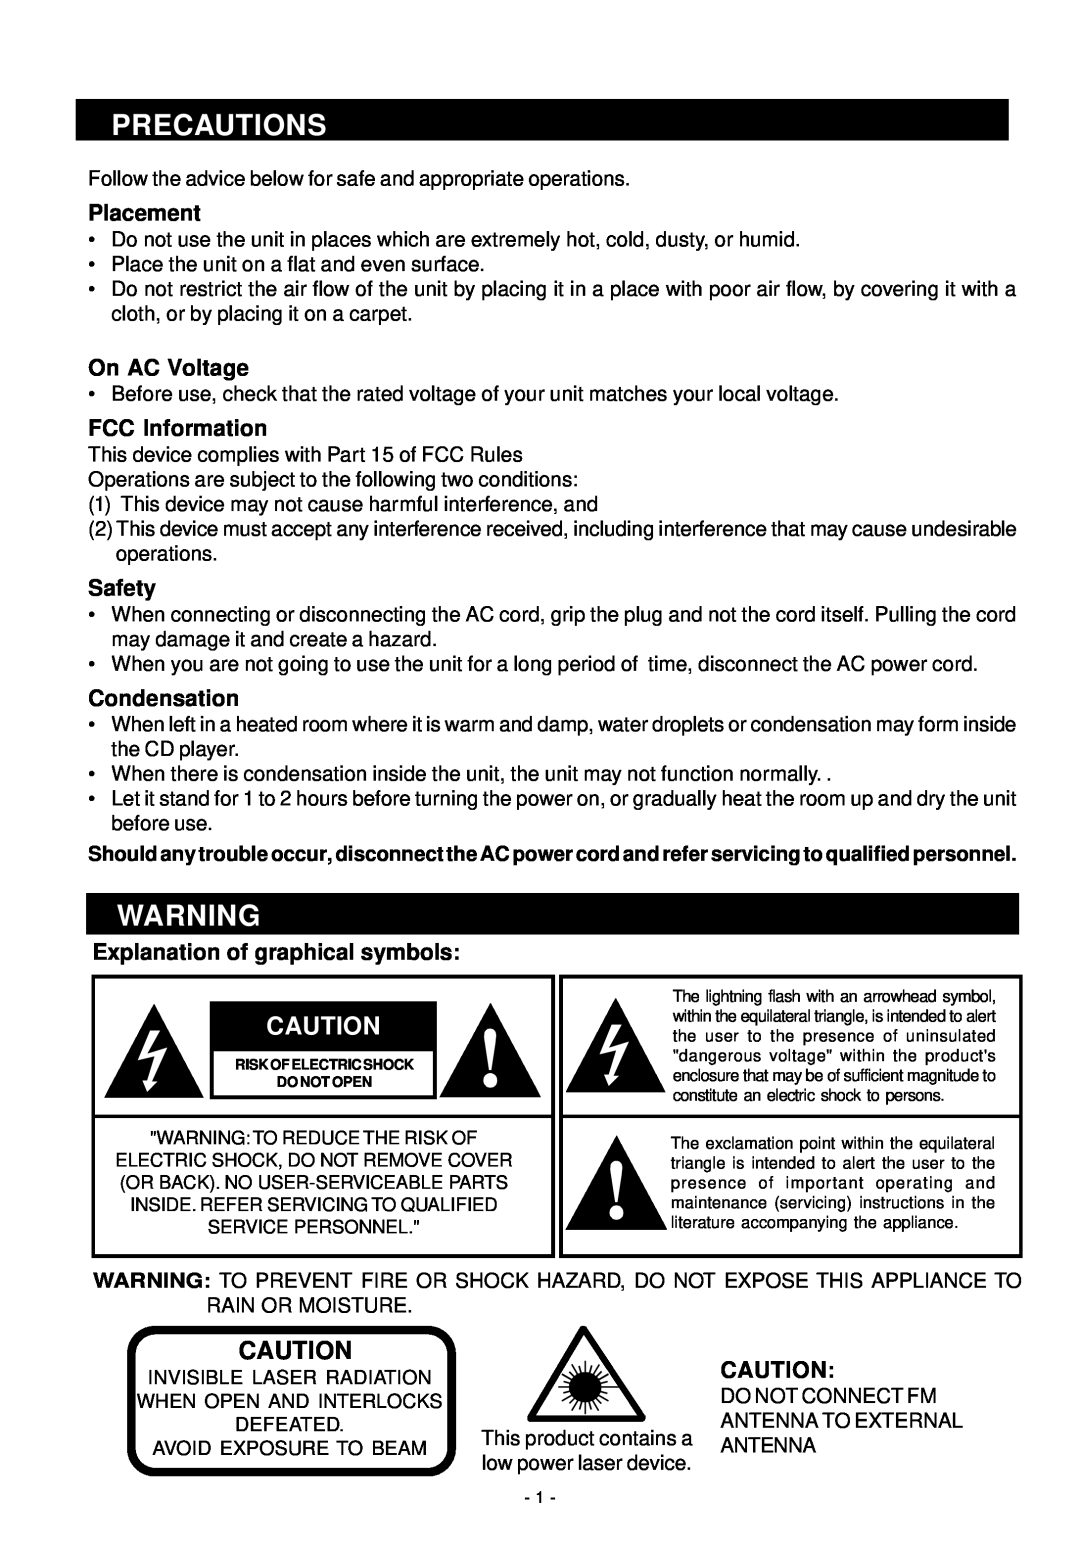 HiFi Works 811-TK5M91-031 instruction manual Precautions, Placement, On AC Voltage, FCC Information, Safety, Condensation 